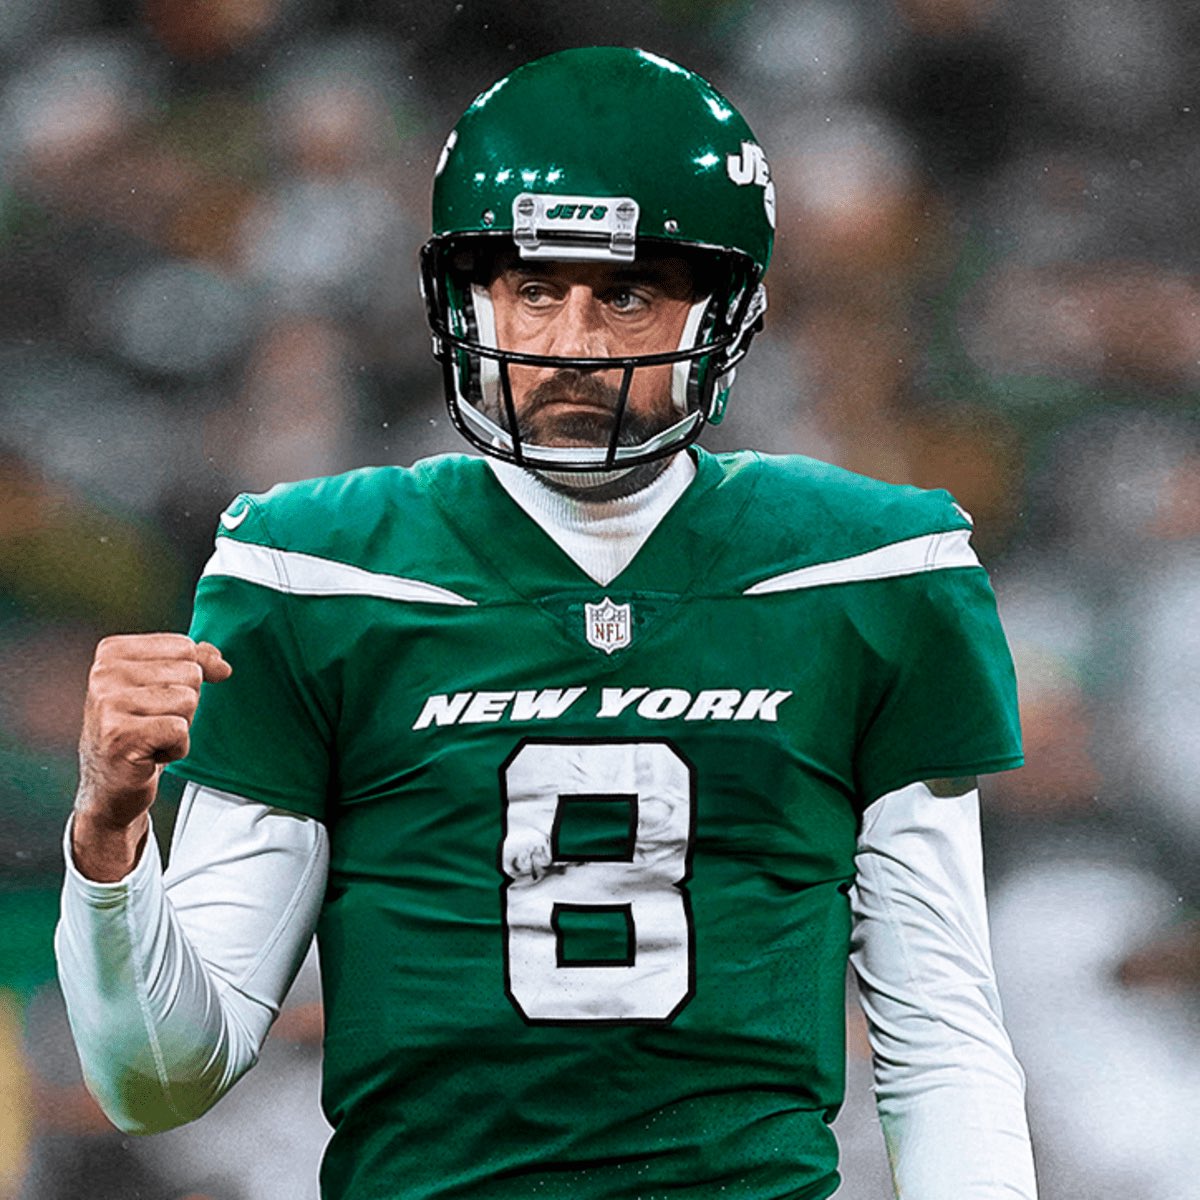 At the young age of 39. Can Aaron Rodgers, on a new team, play at an MVP level? #NFLTwitter Does he have the right stuff still? The @nyjets brought in “his guys” to help in the passing game. Did they do the right thing for #FantasyFootball ? @MyFantasyLeague